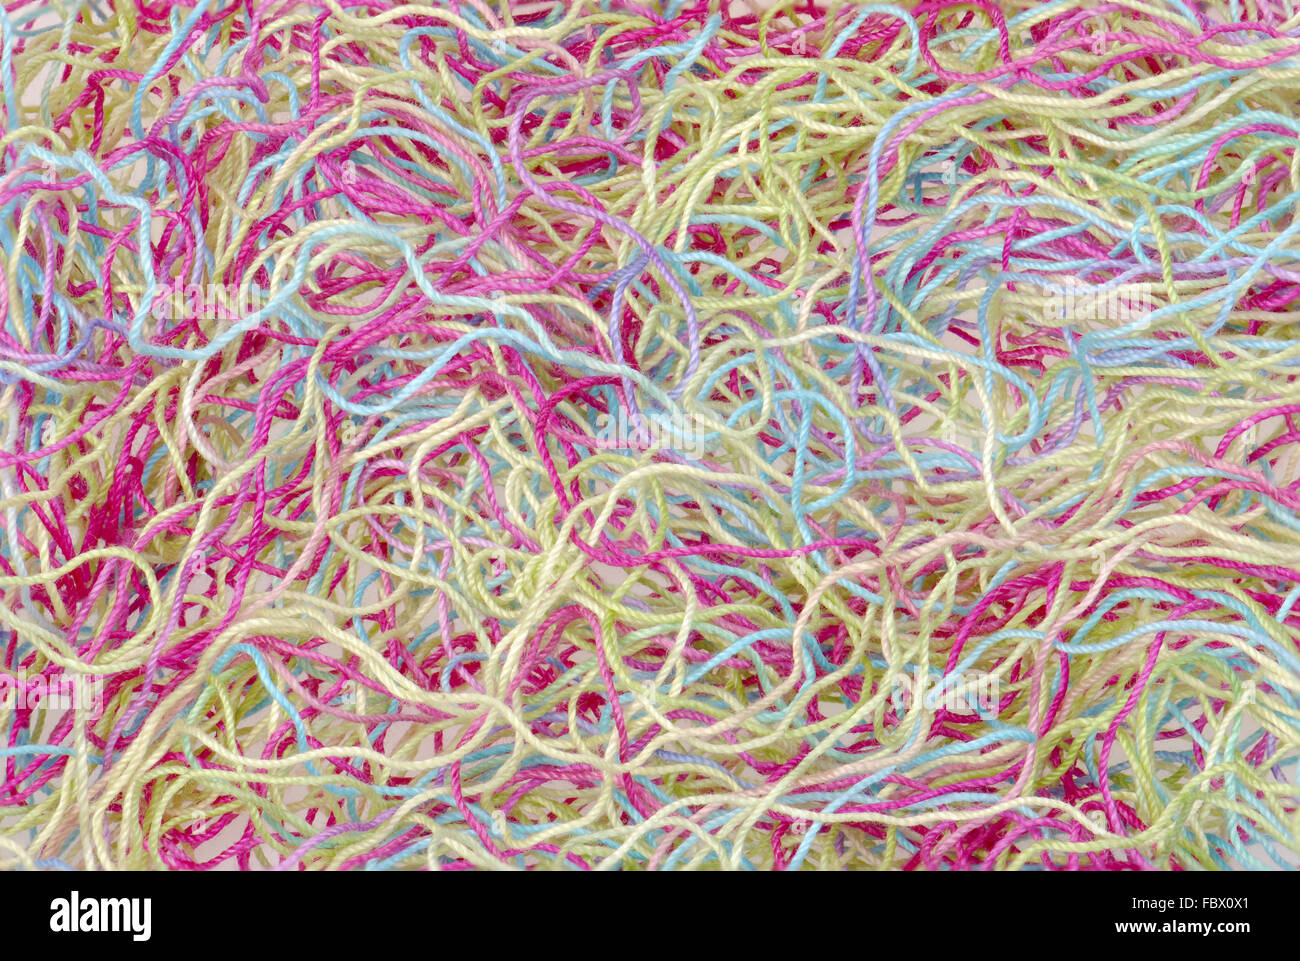 closeup bacground of multicolored threads Stock Photo